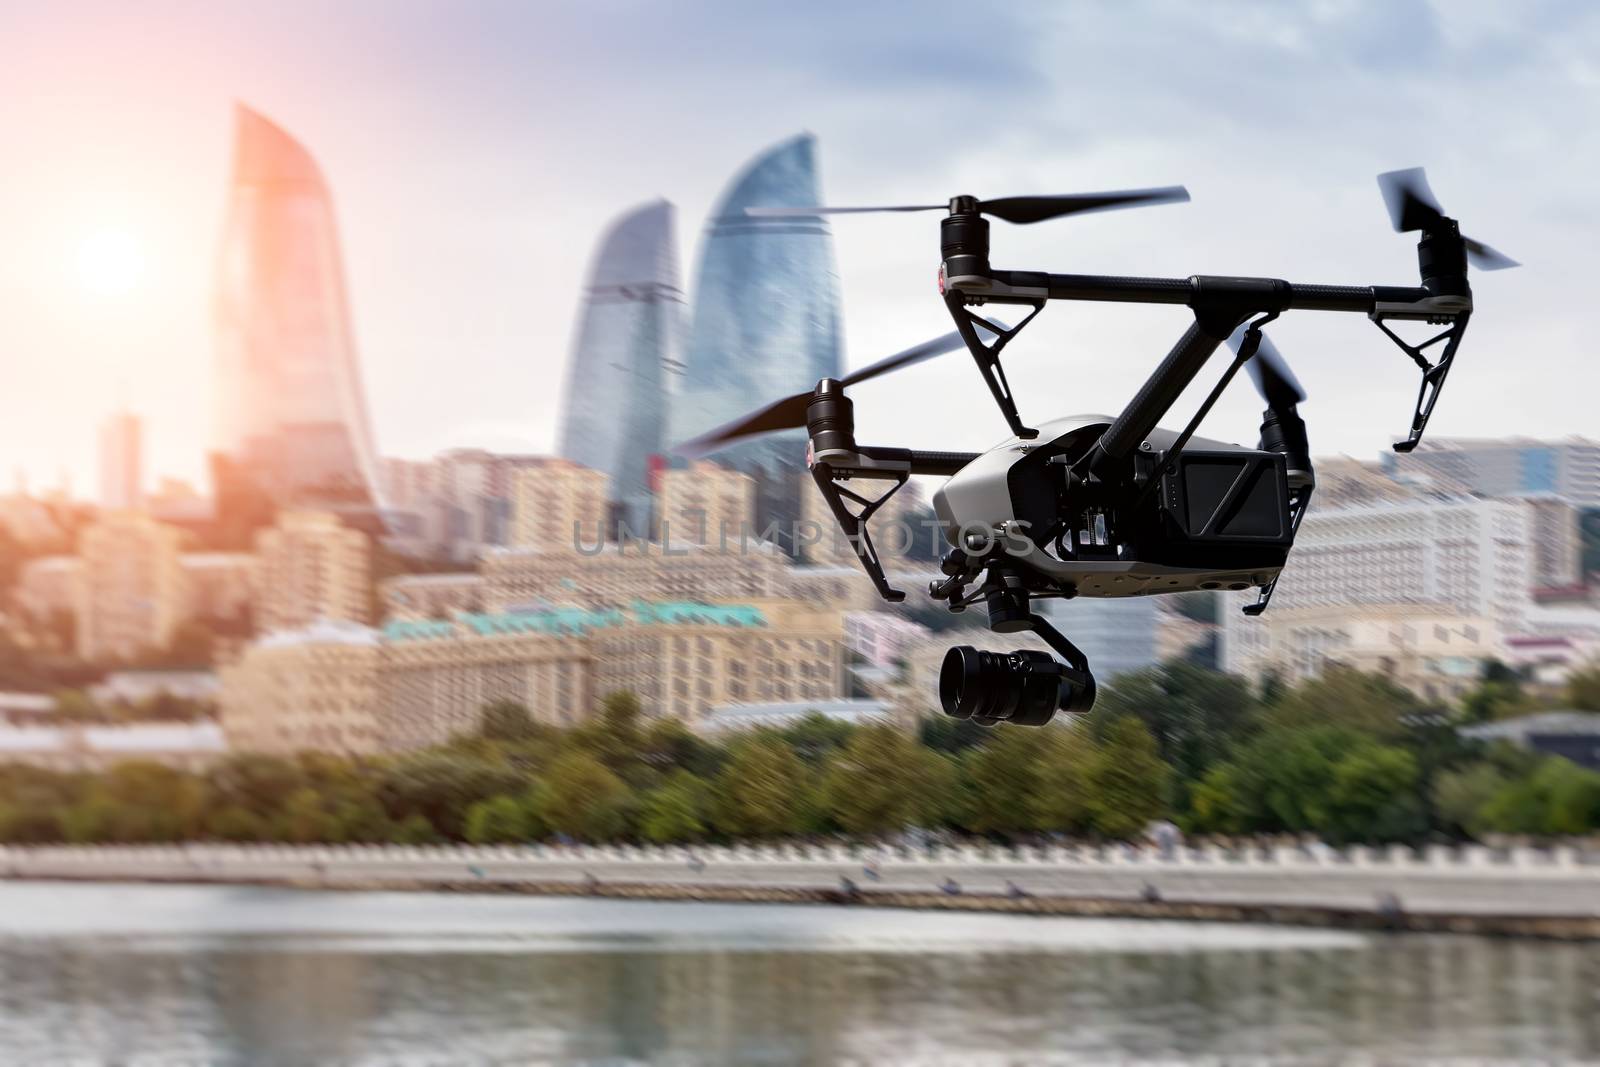 Drone flying over Baku city on blurred background.